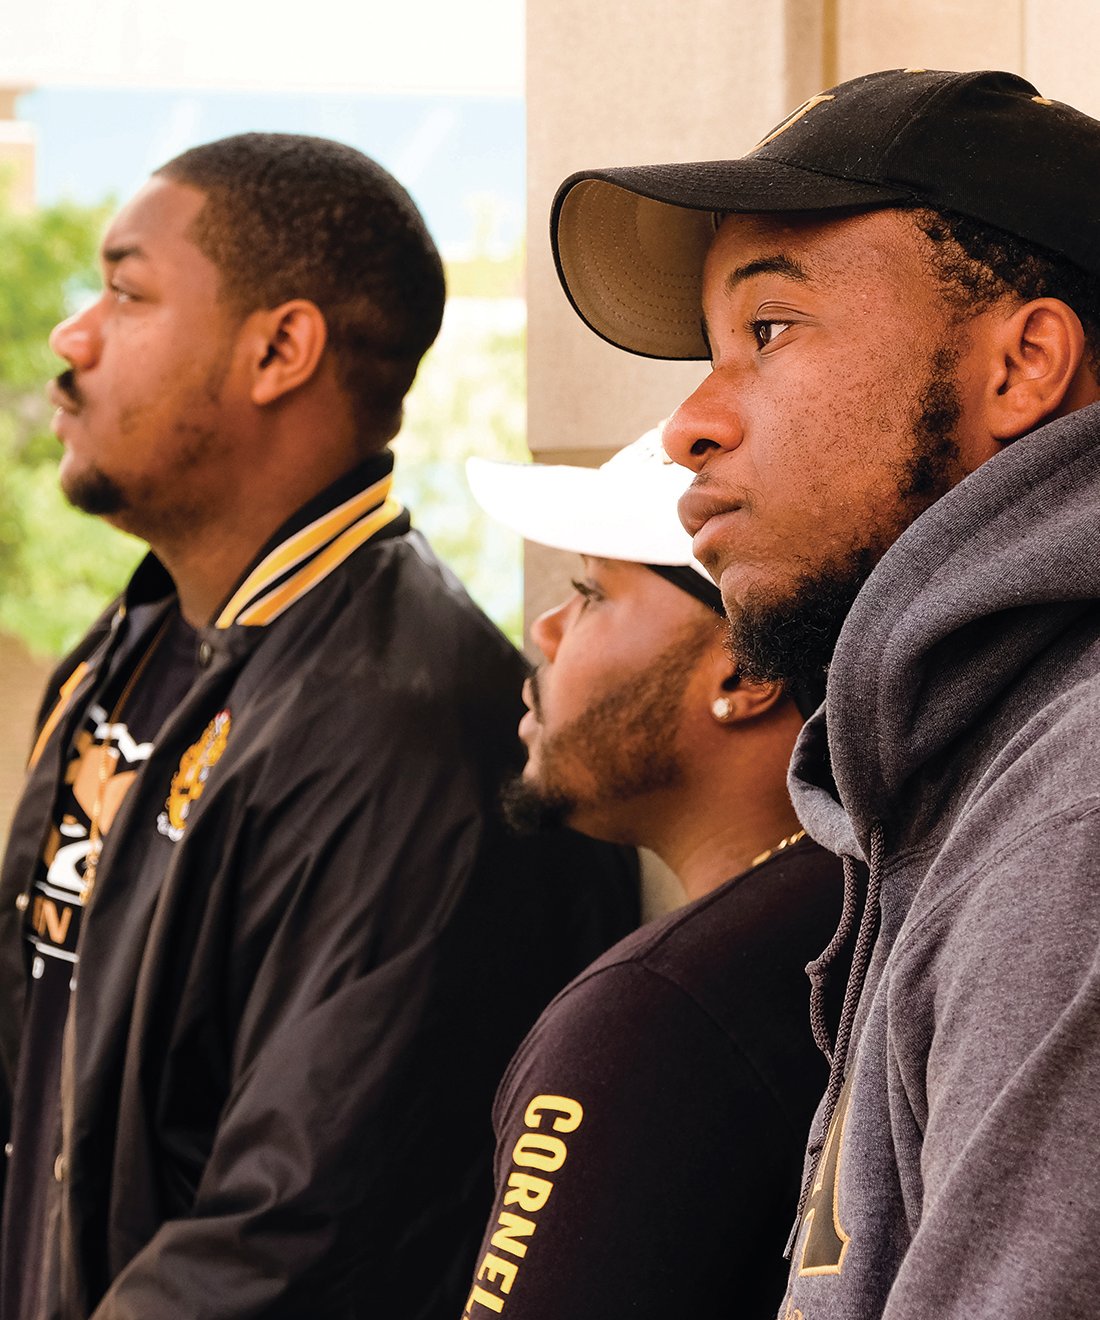 Three members of Alpha Phi Alpha fraternity look into the distance